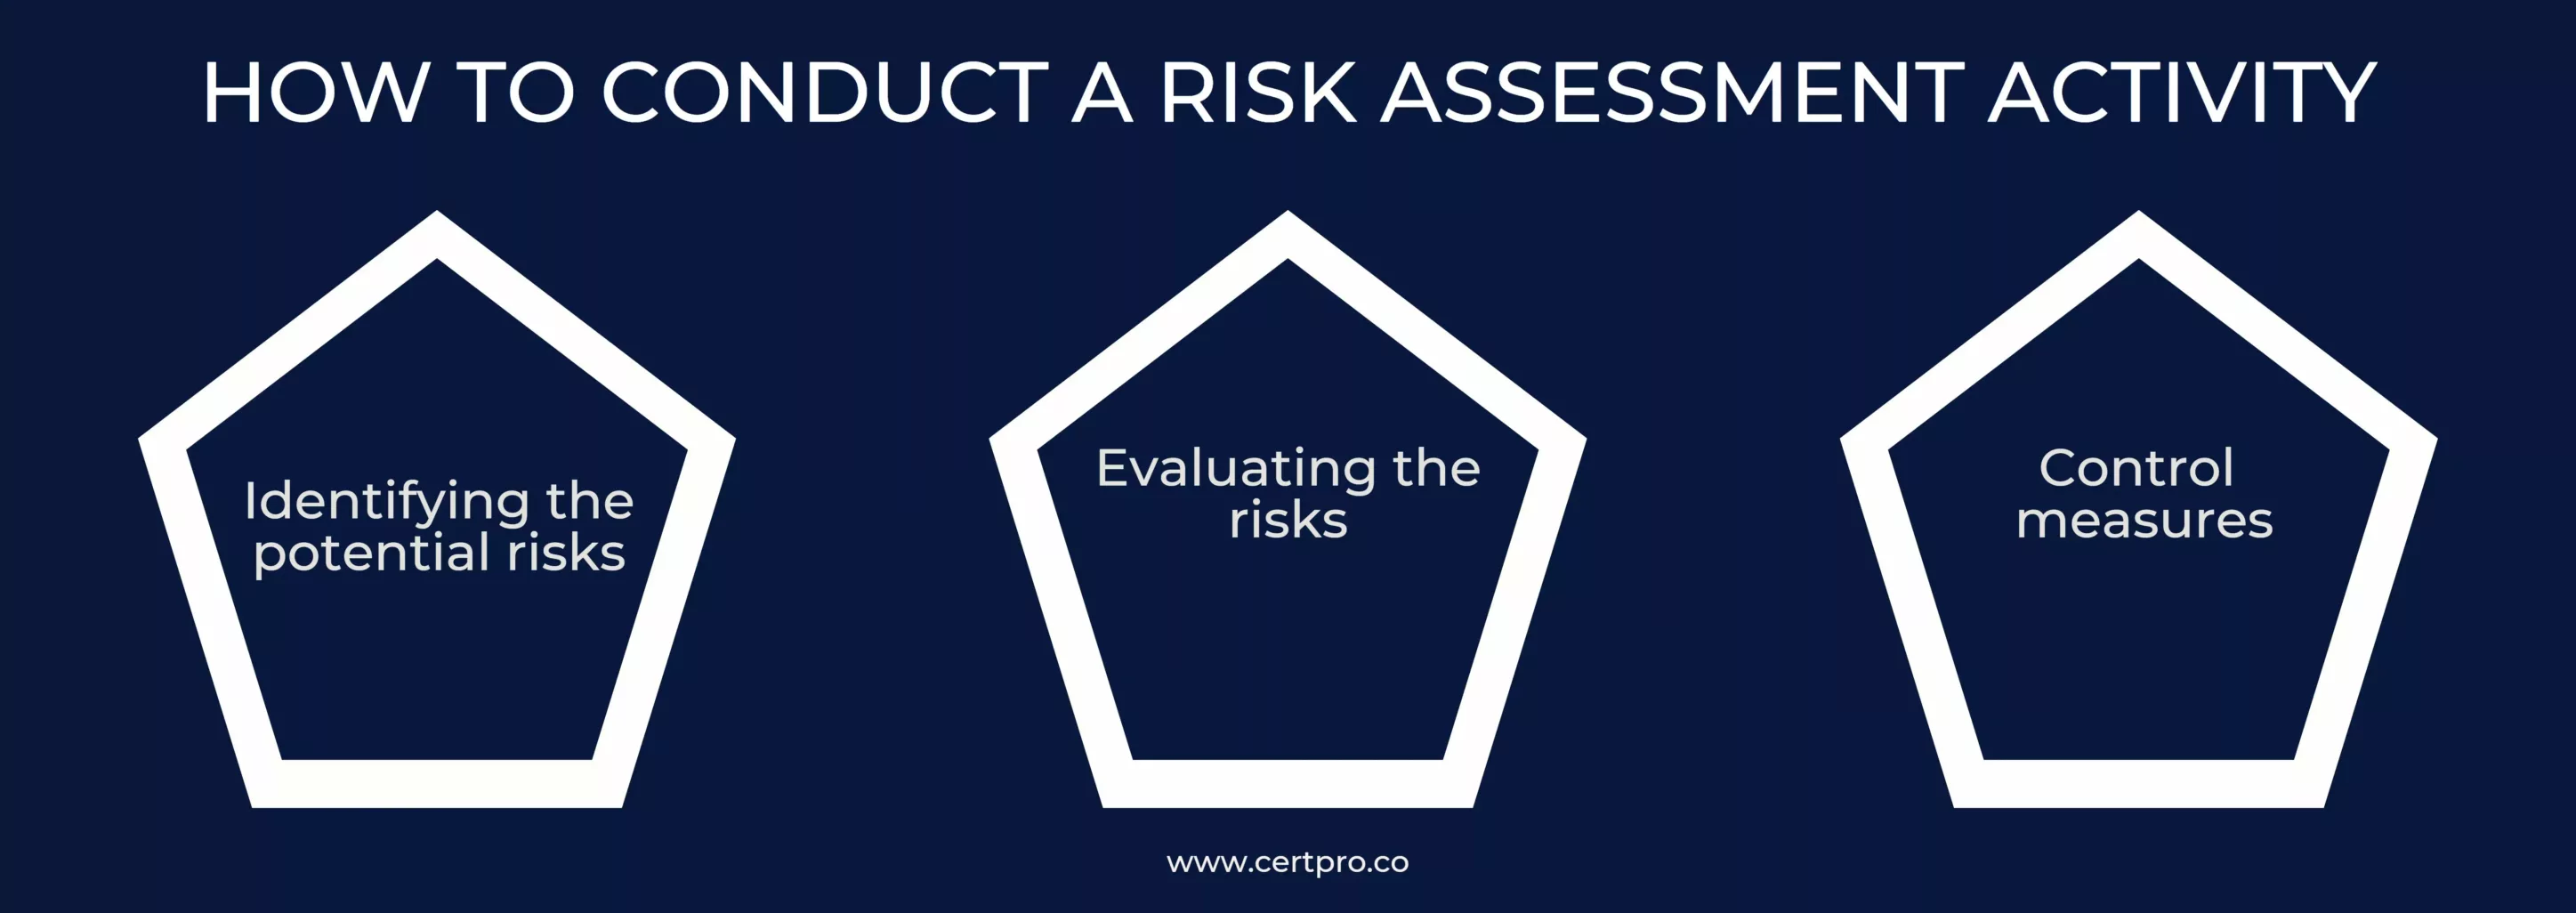 HOW TO CONDUCT A RISK ASSESSMENT ACTIVITY